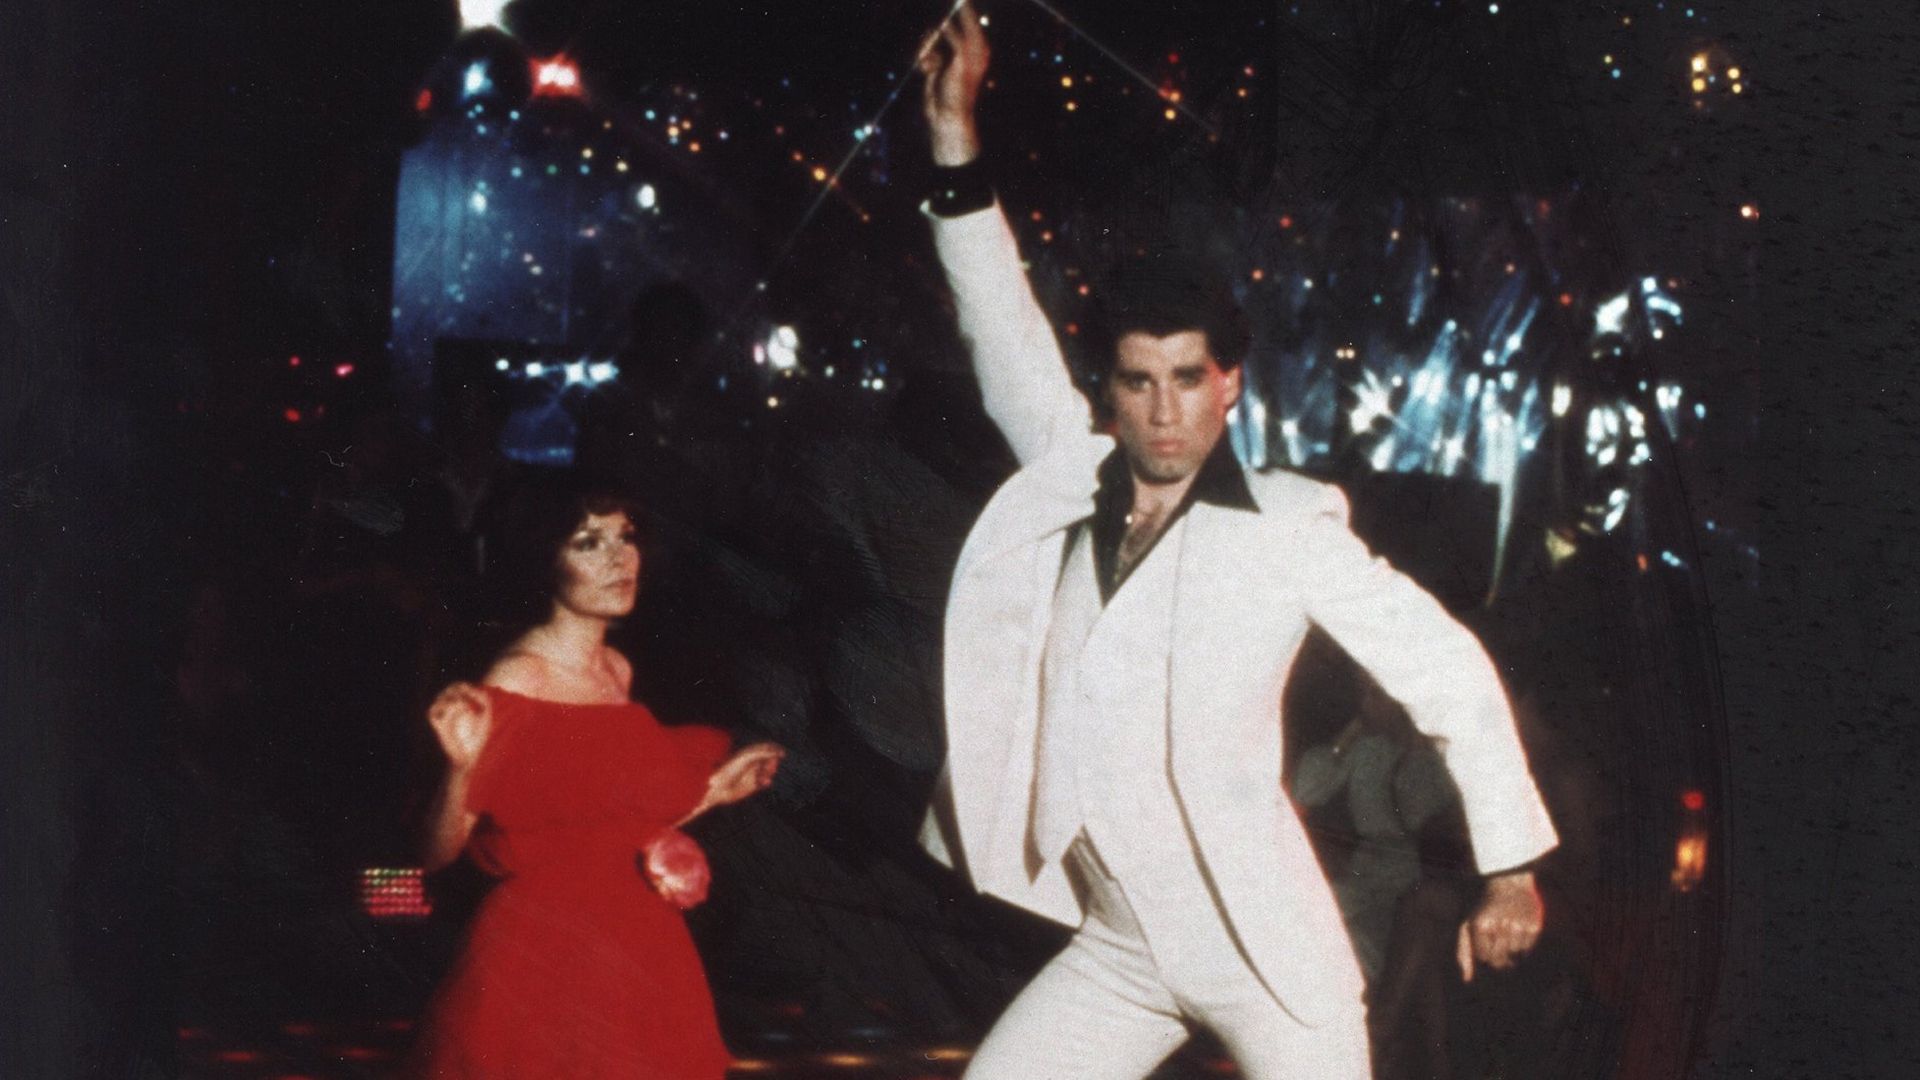 Saturday Night Fever' turns 40! 6 things you may not know about